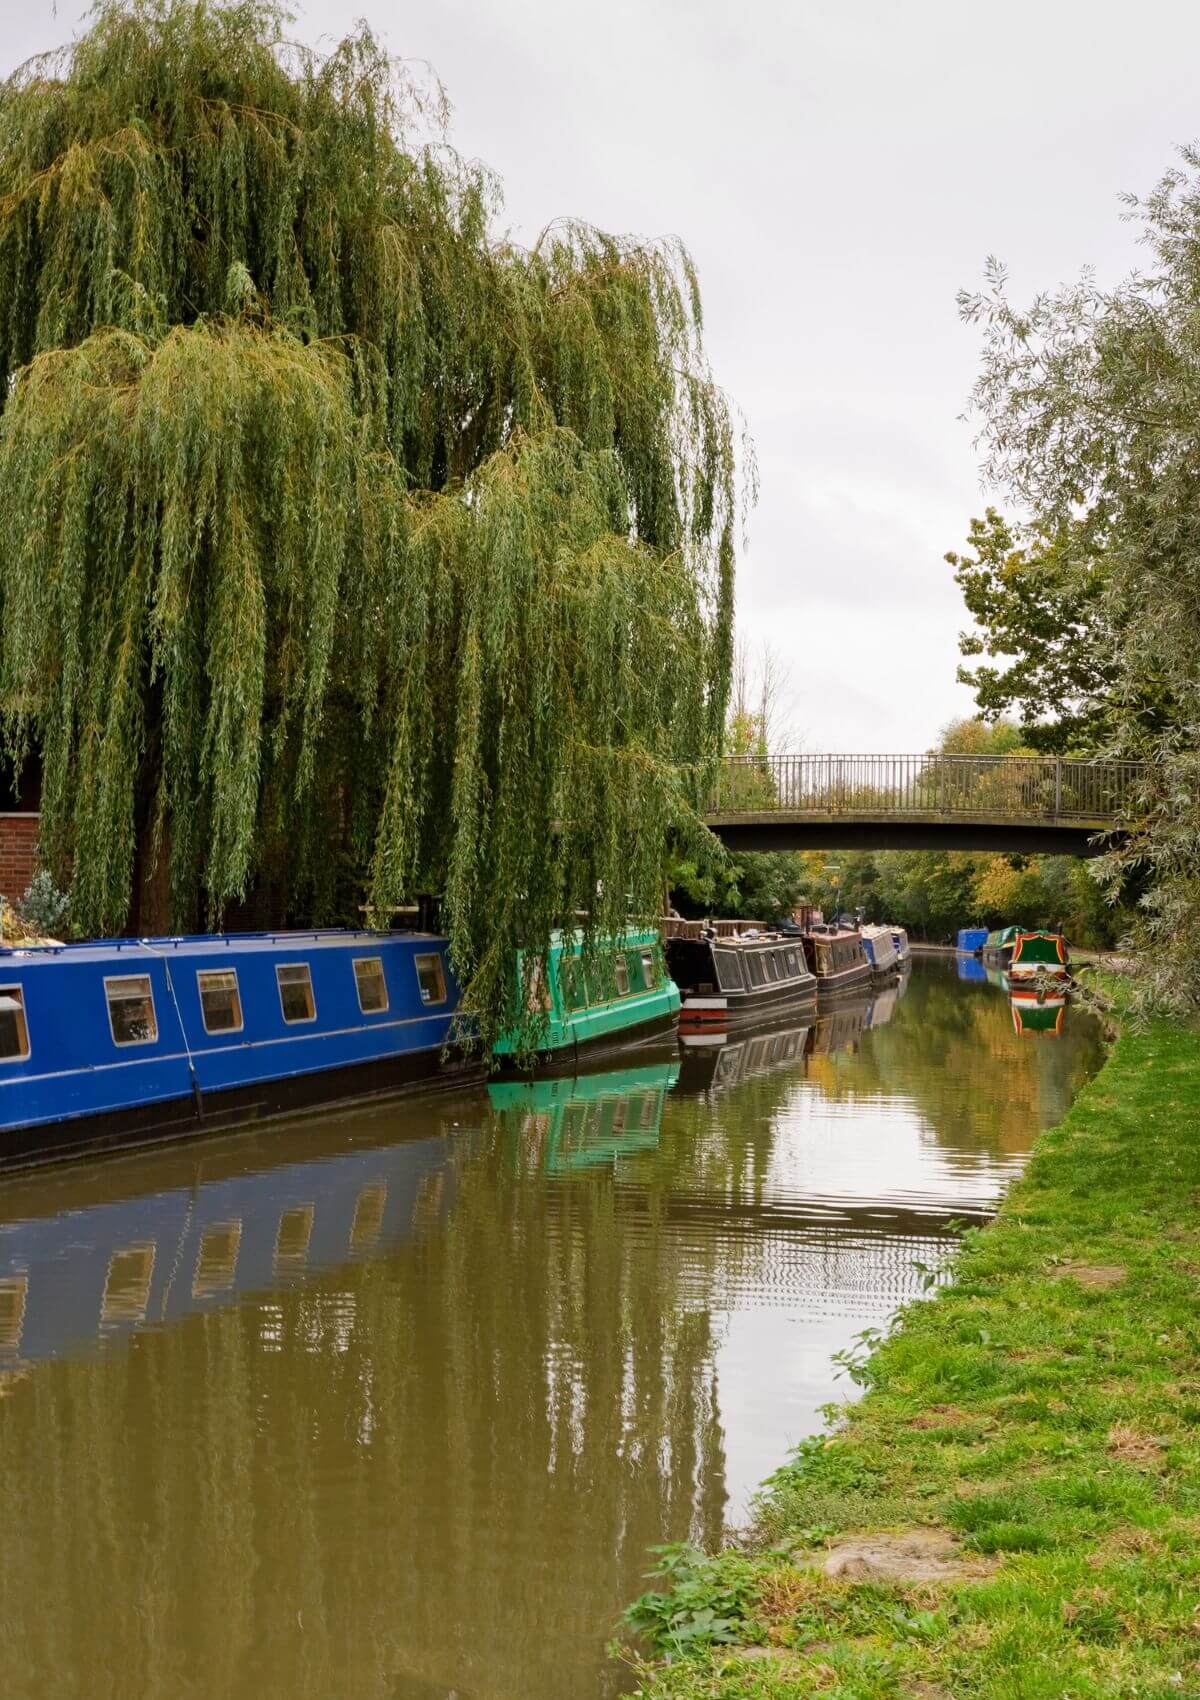 Oxford Canal is one of the best spots for a narrowboat in England